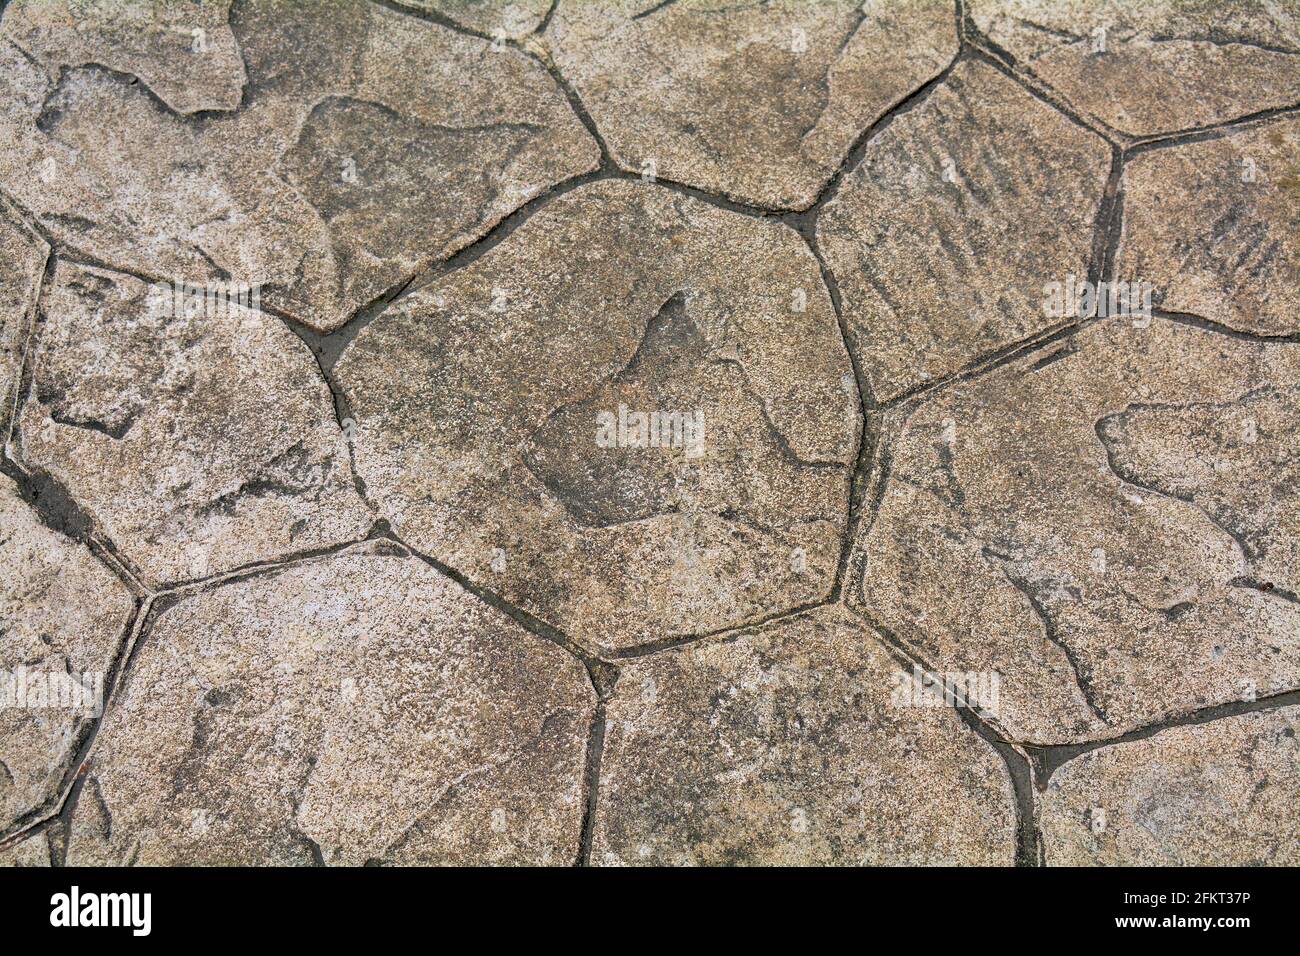 Cracked and random design paving suitable for backgrounds Stock Photo